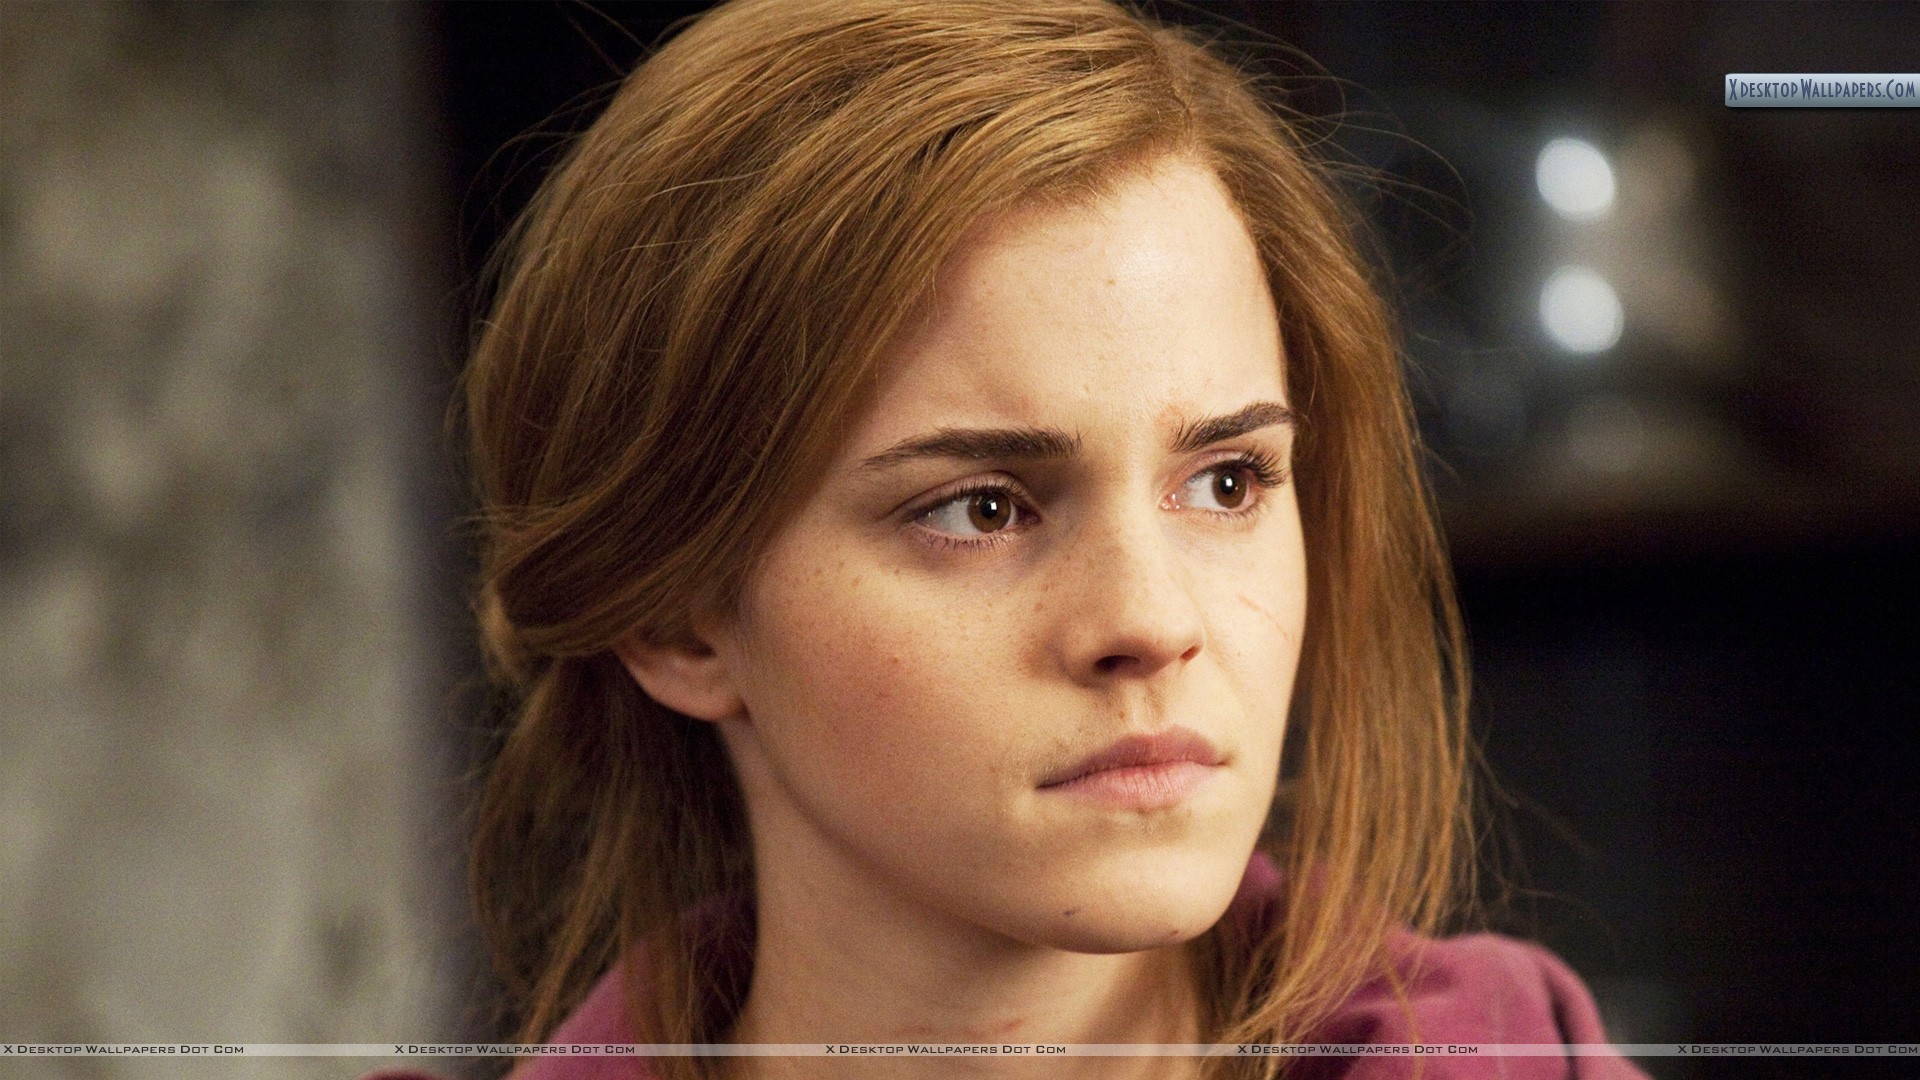 1920x1080 You are viewing wallpaper titled "Emma Watson Sad Face ...